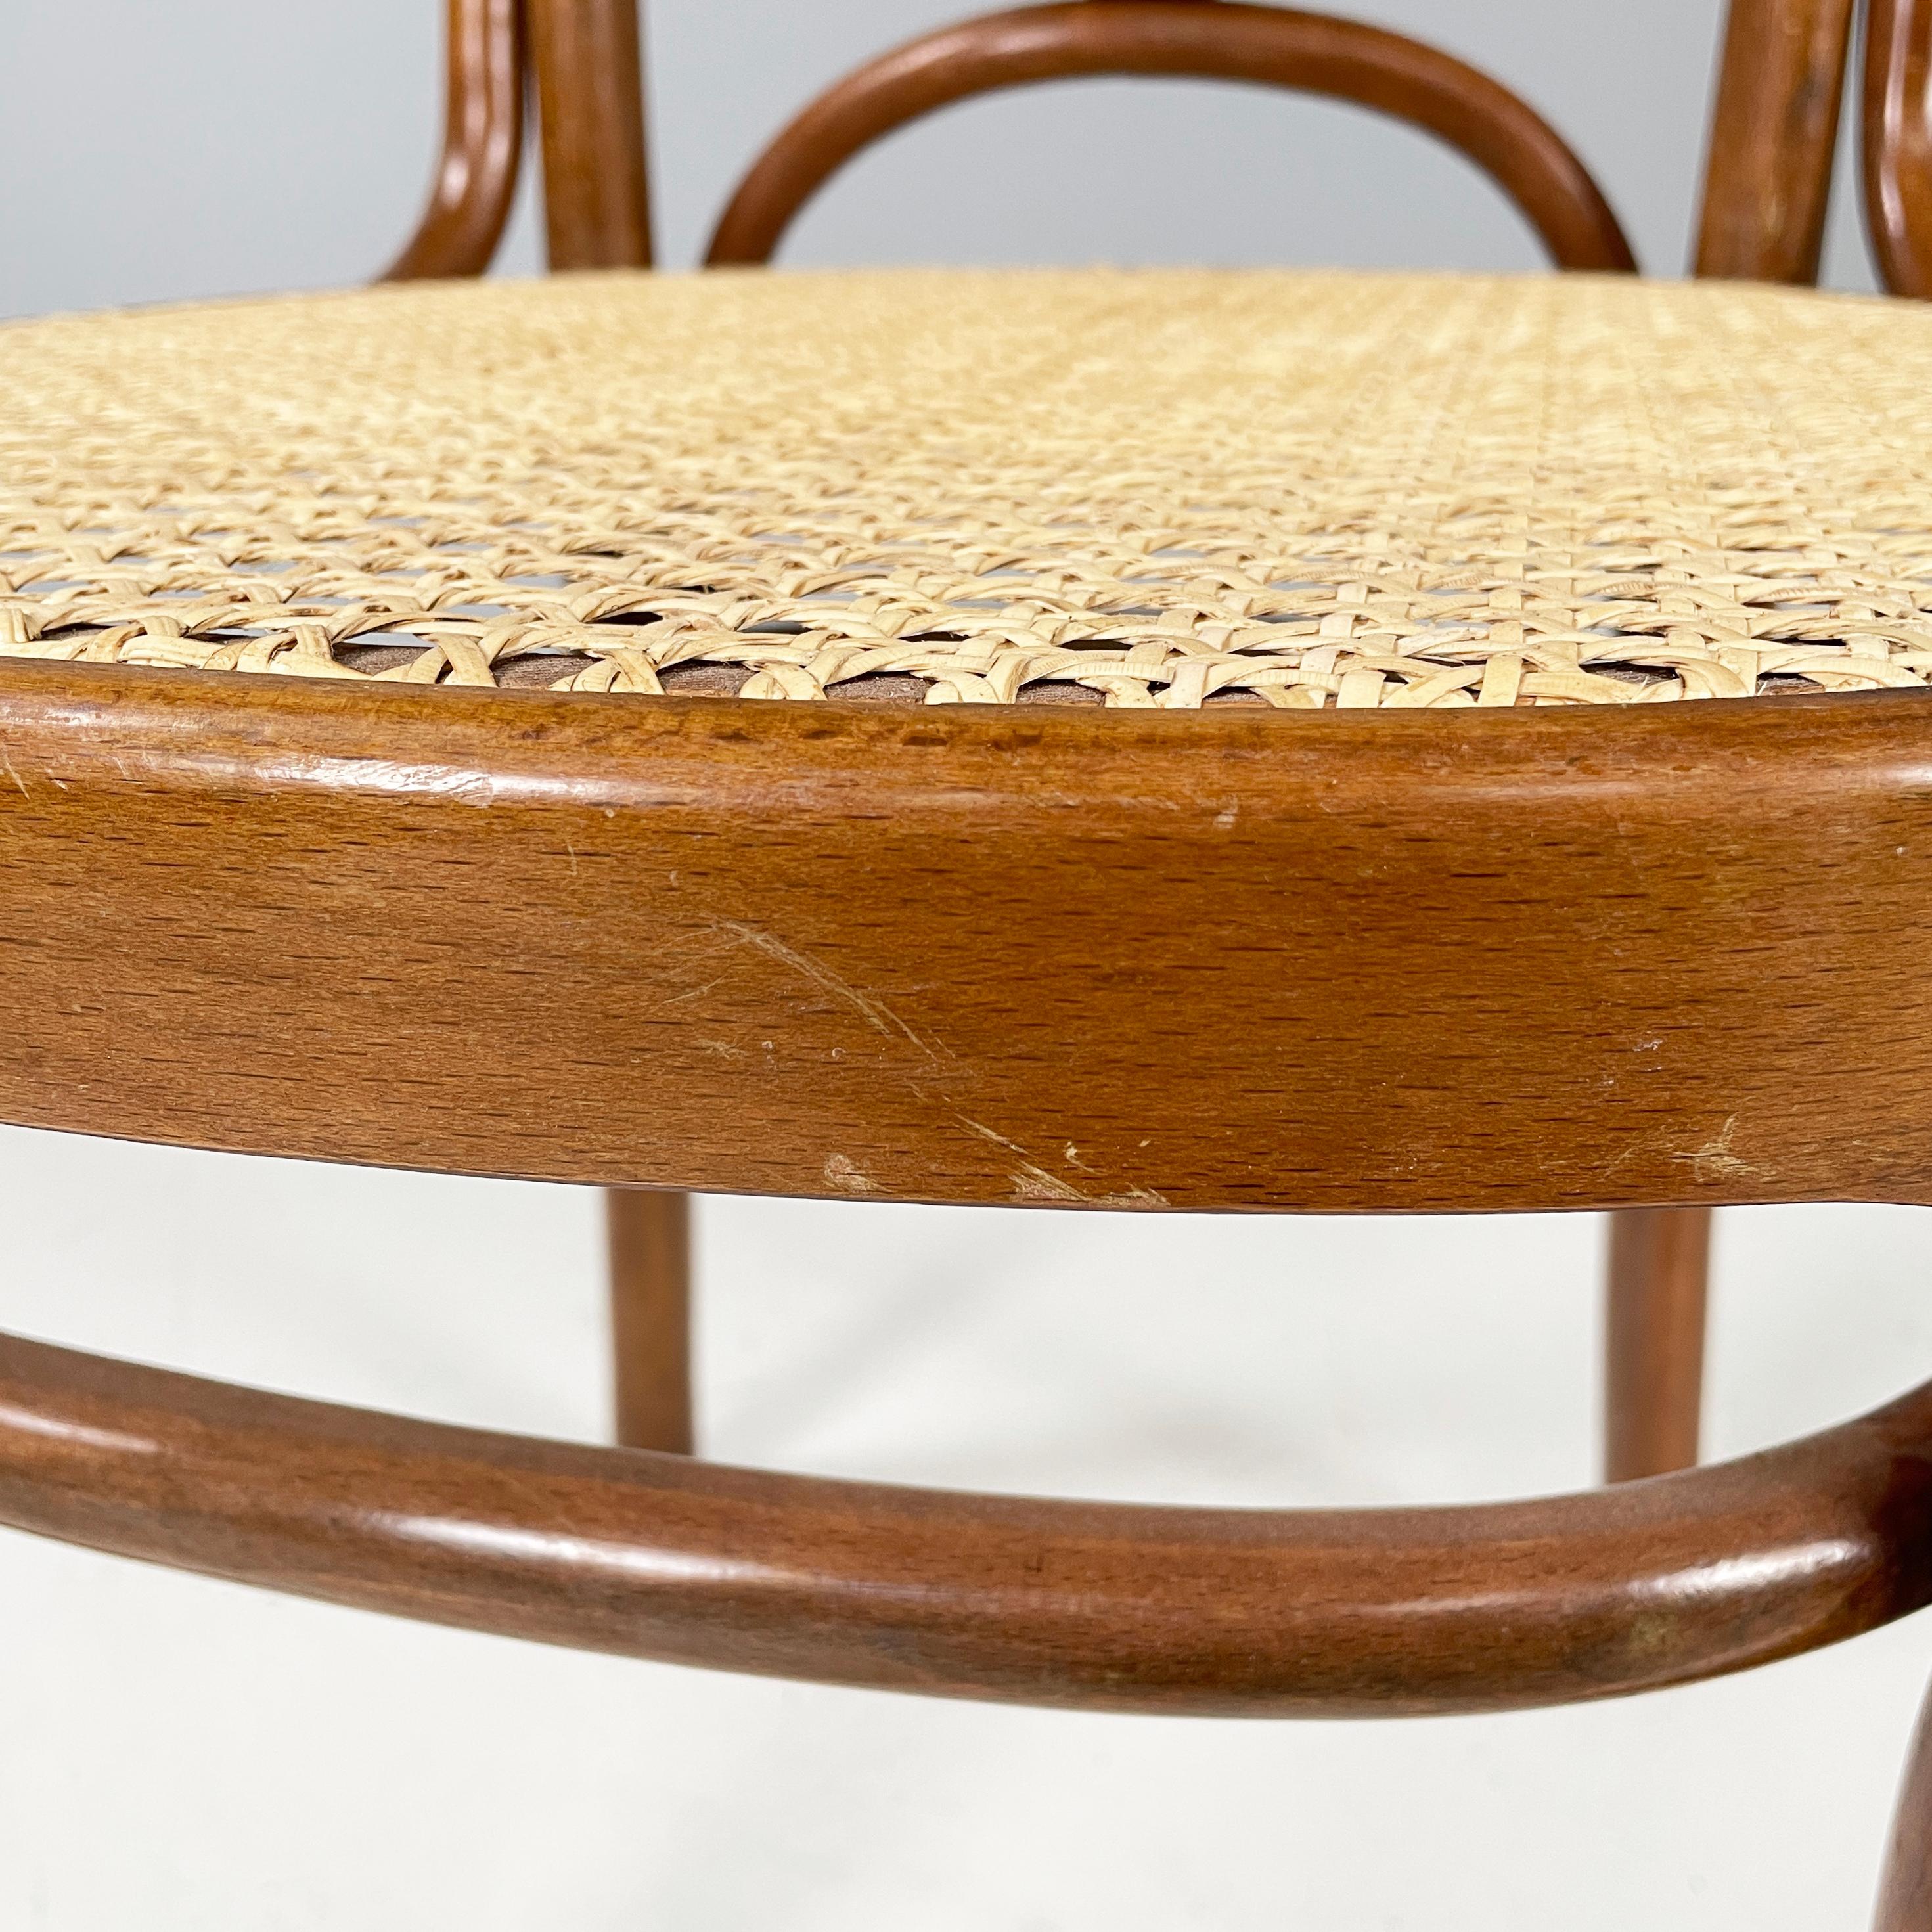 Italian Chair in straw and wood, 1900-1950s For Sale 6